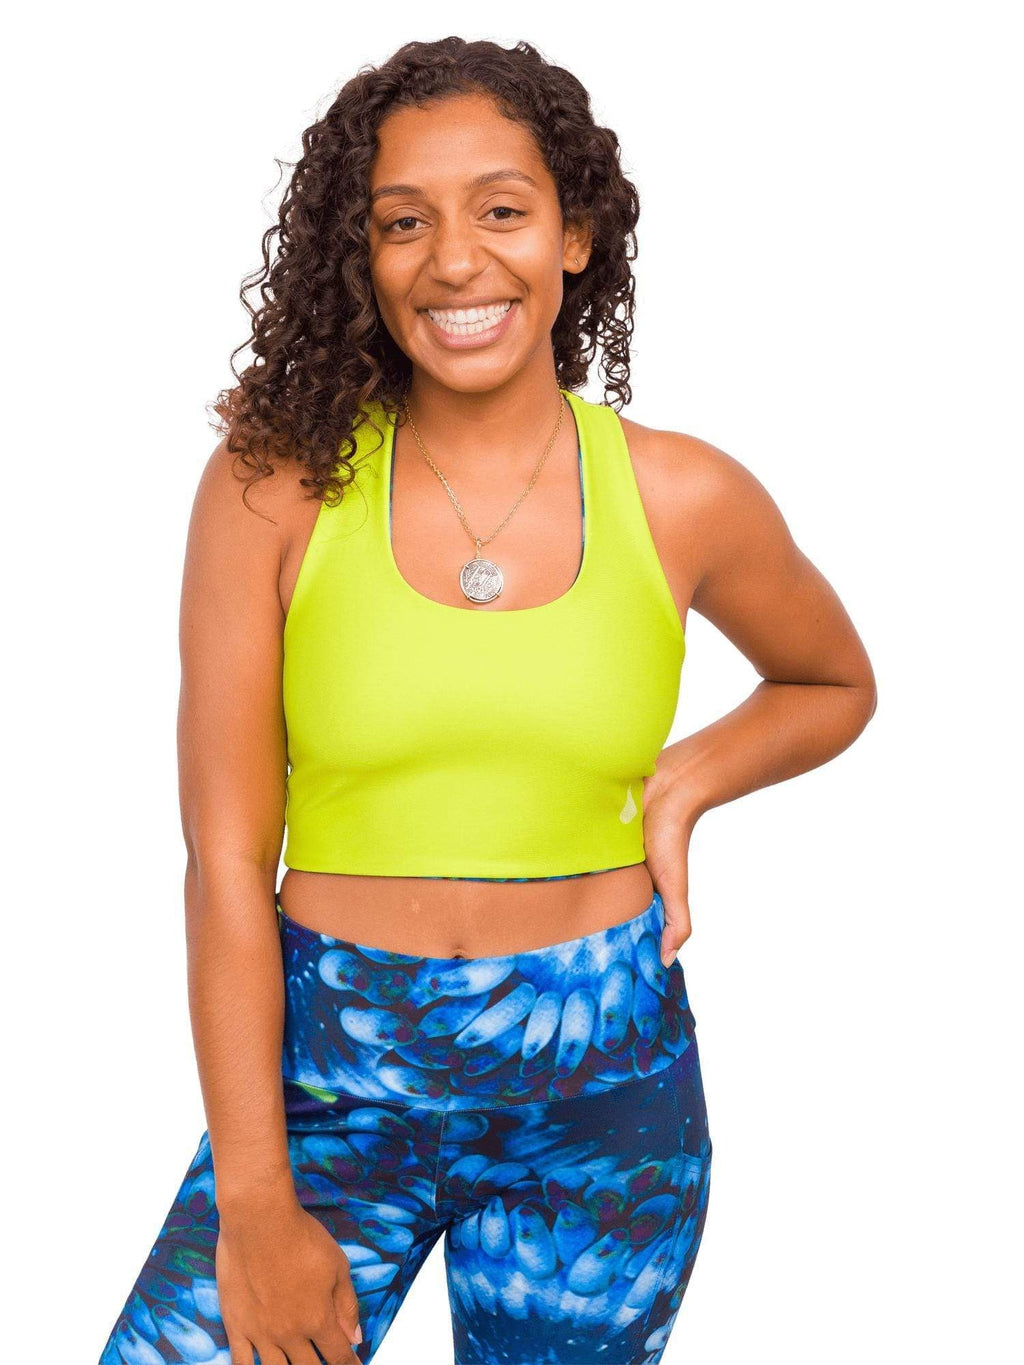 Model: Gabrielle works in coral reef restoration and strives to end single-use plastic in her daily routine. She is 5'4", 135lbs, 34C and is wearing a M top and M leggings.